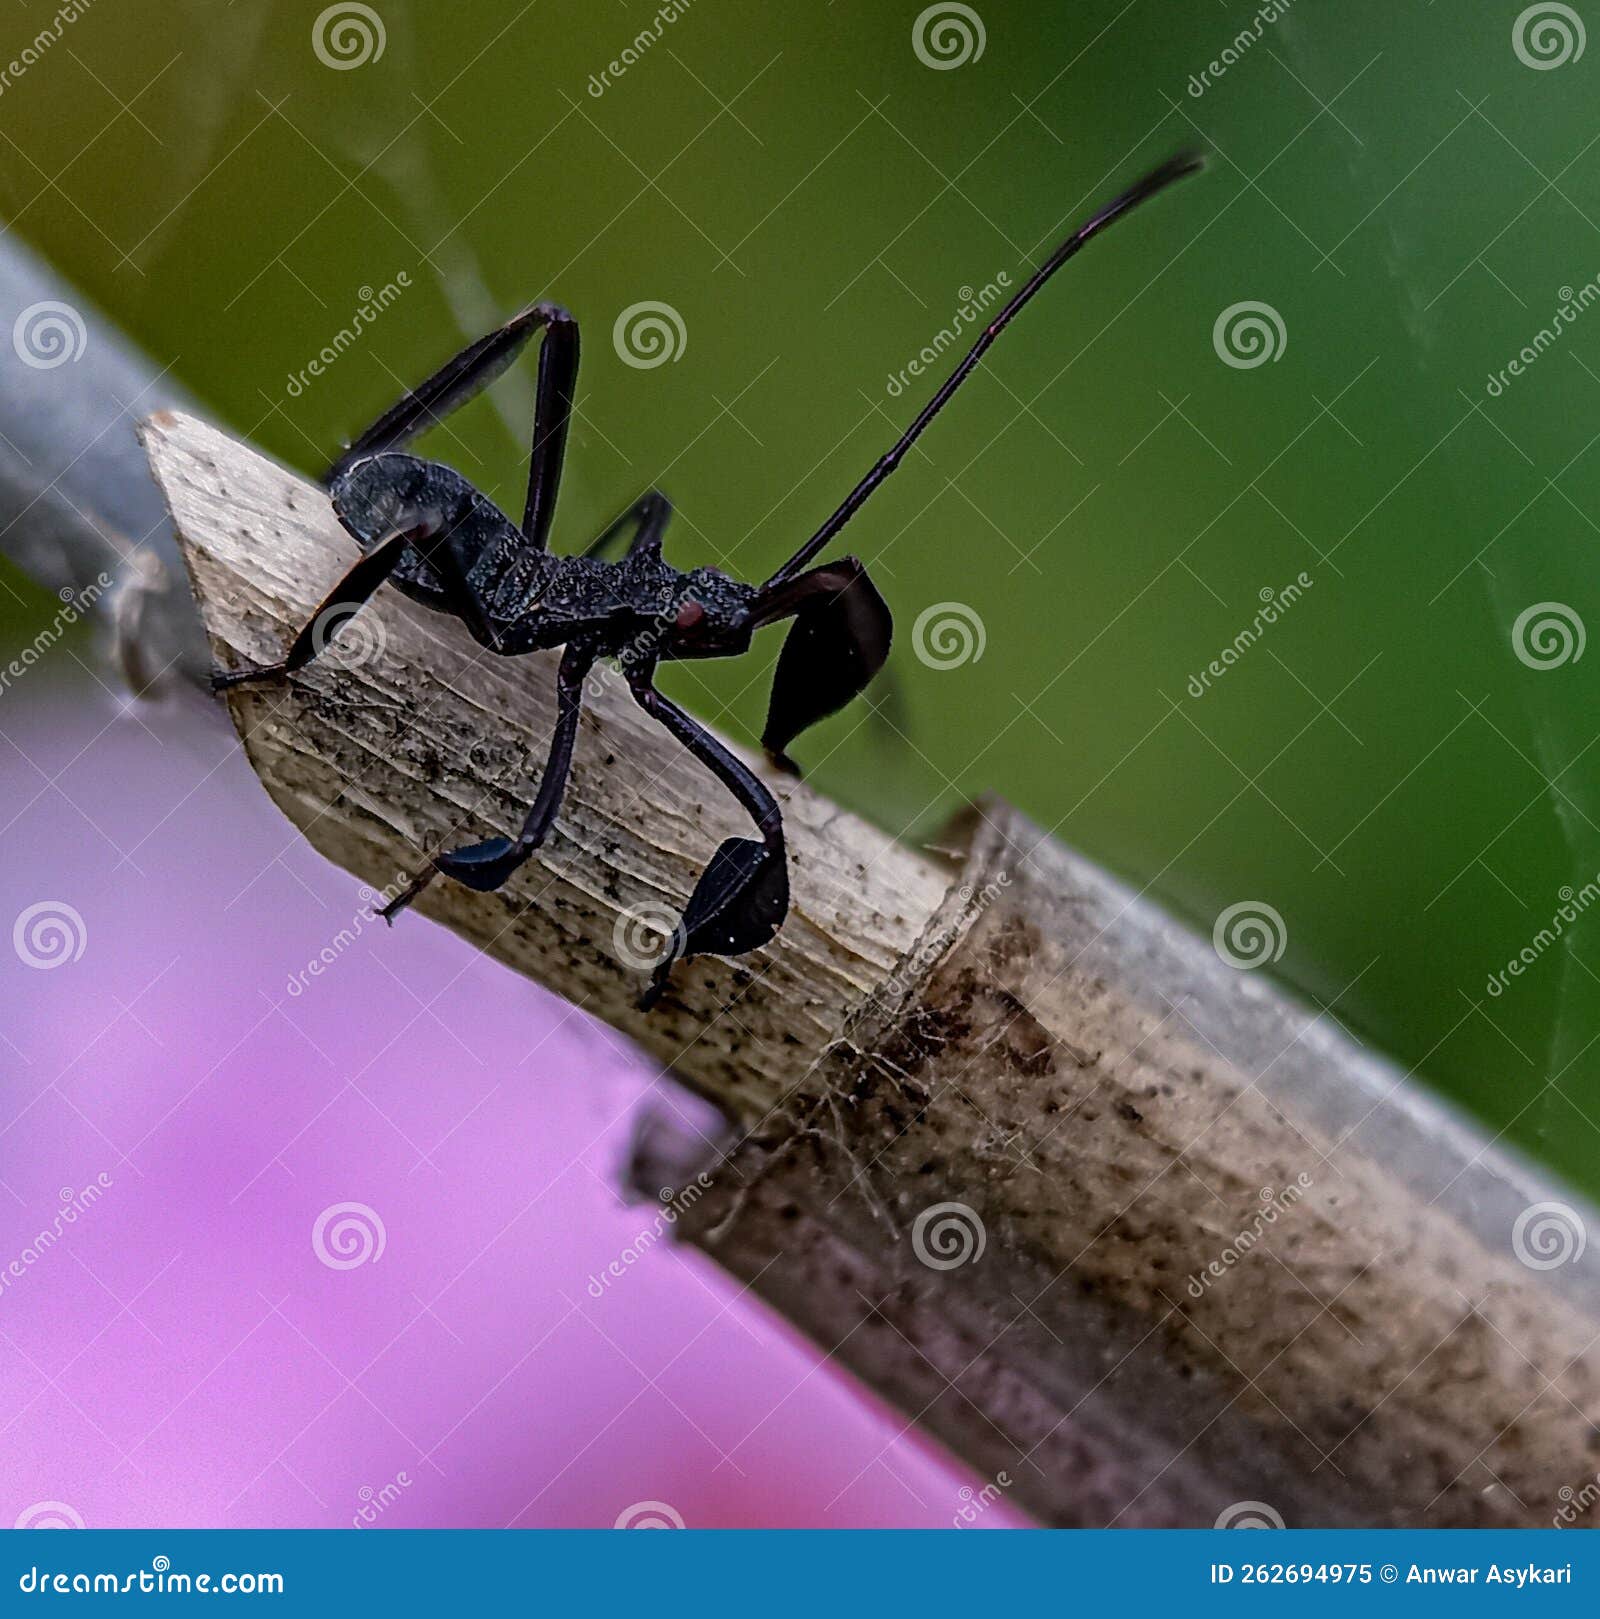 small insect in black costum